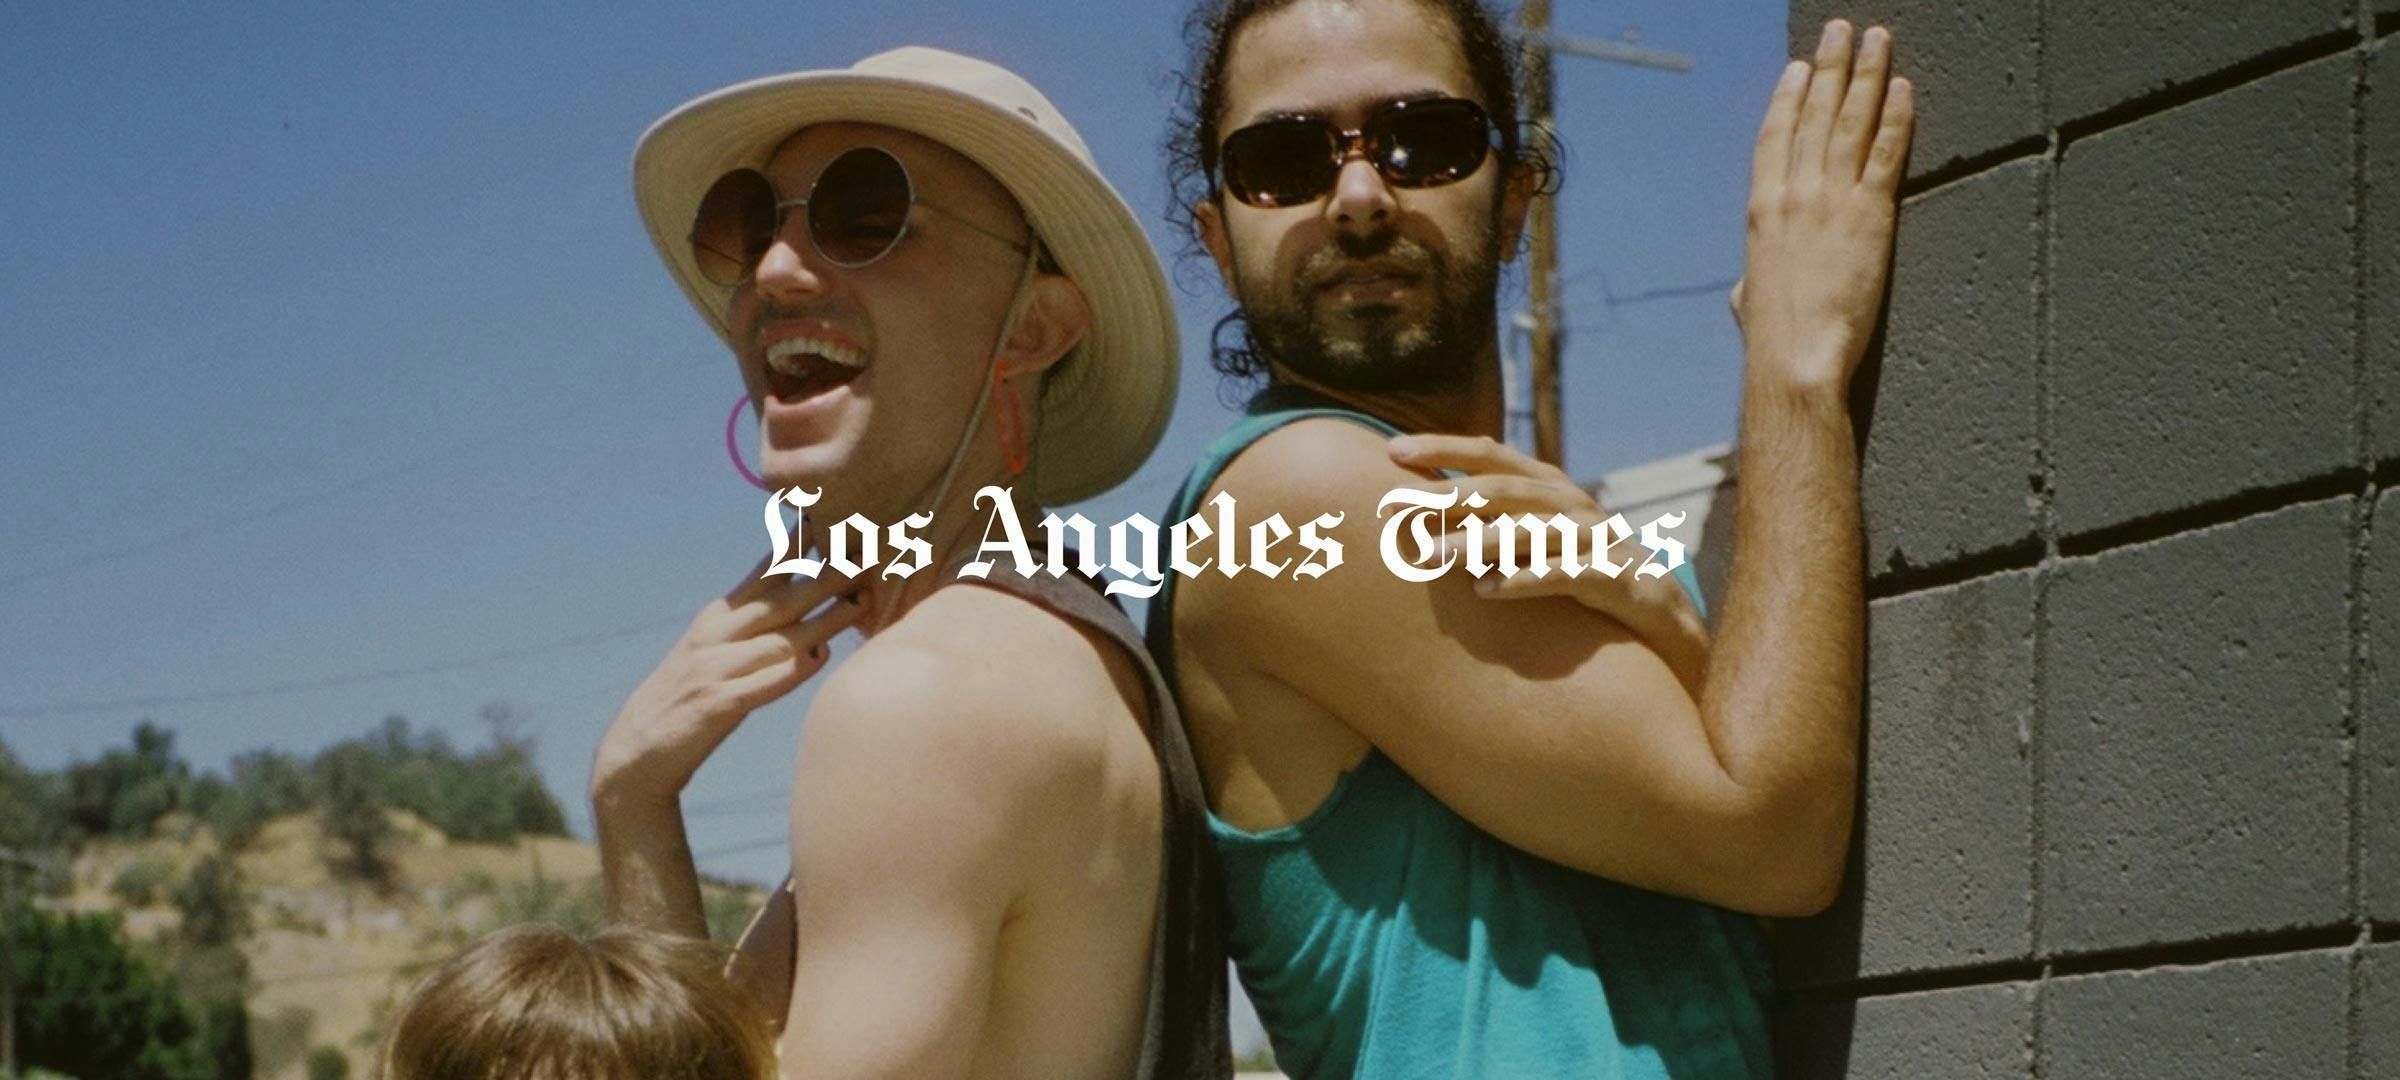 We're in the LA Times!